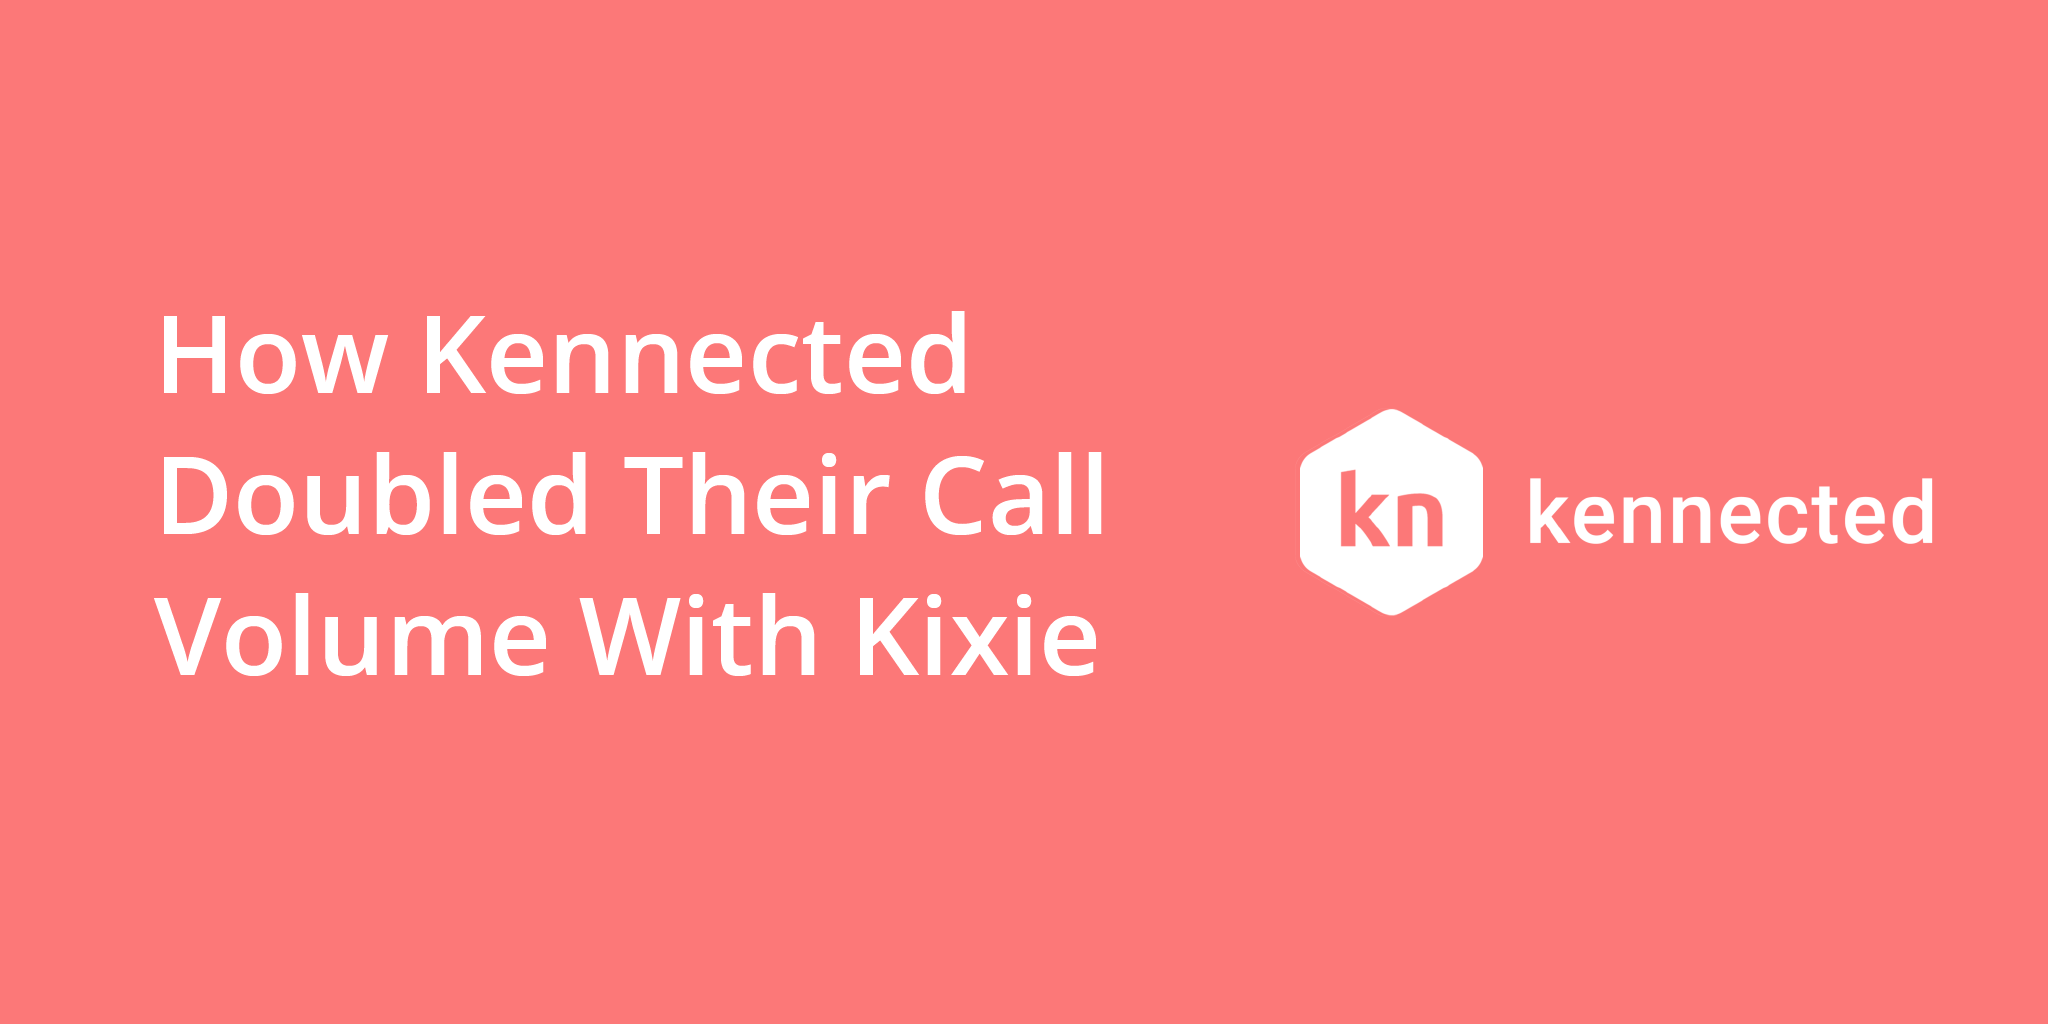 How Kennected Doubled Their Call Volume With Kixie